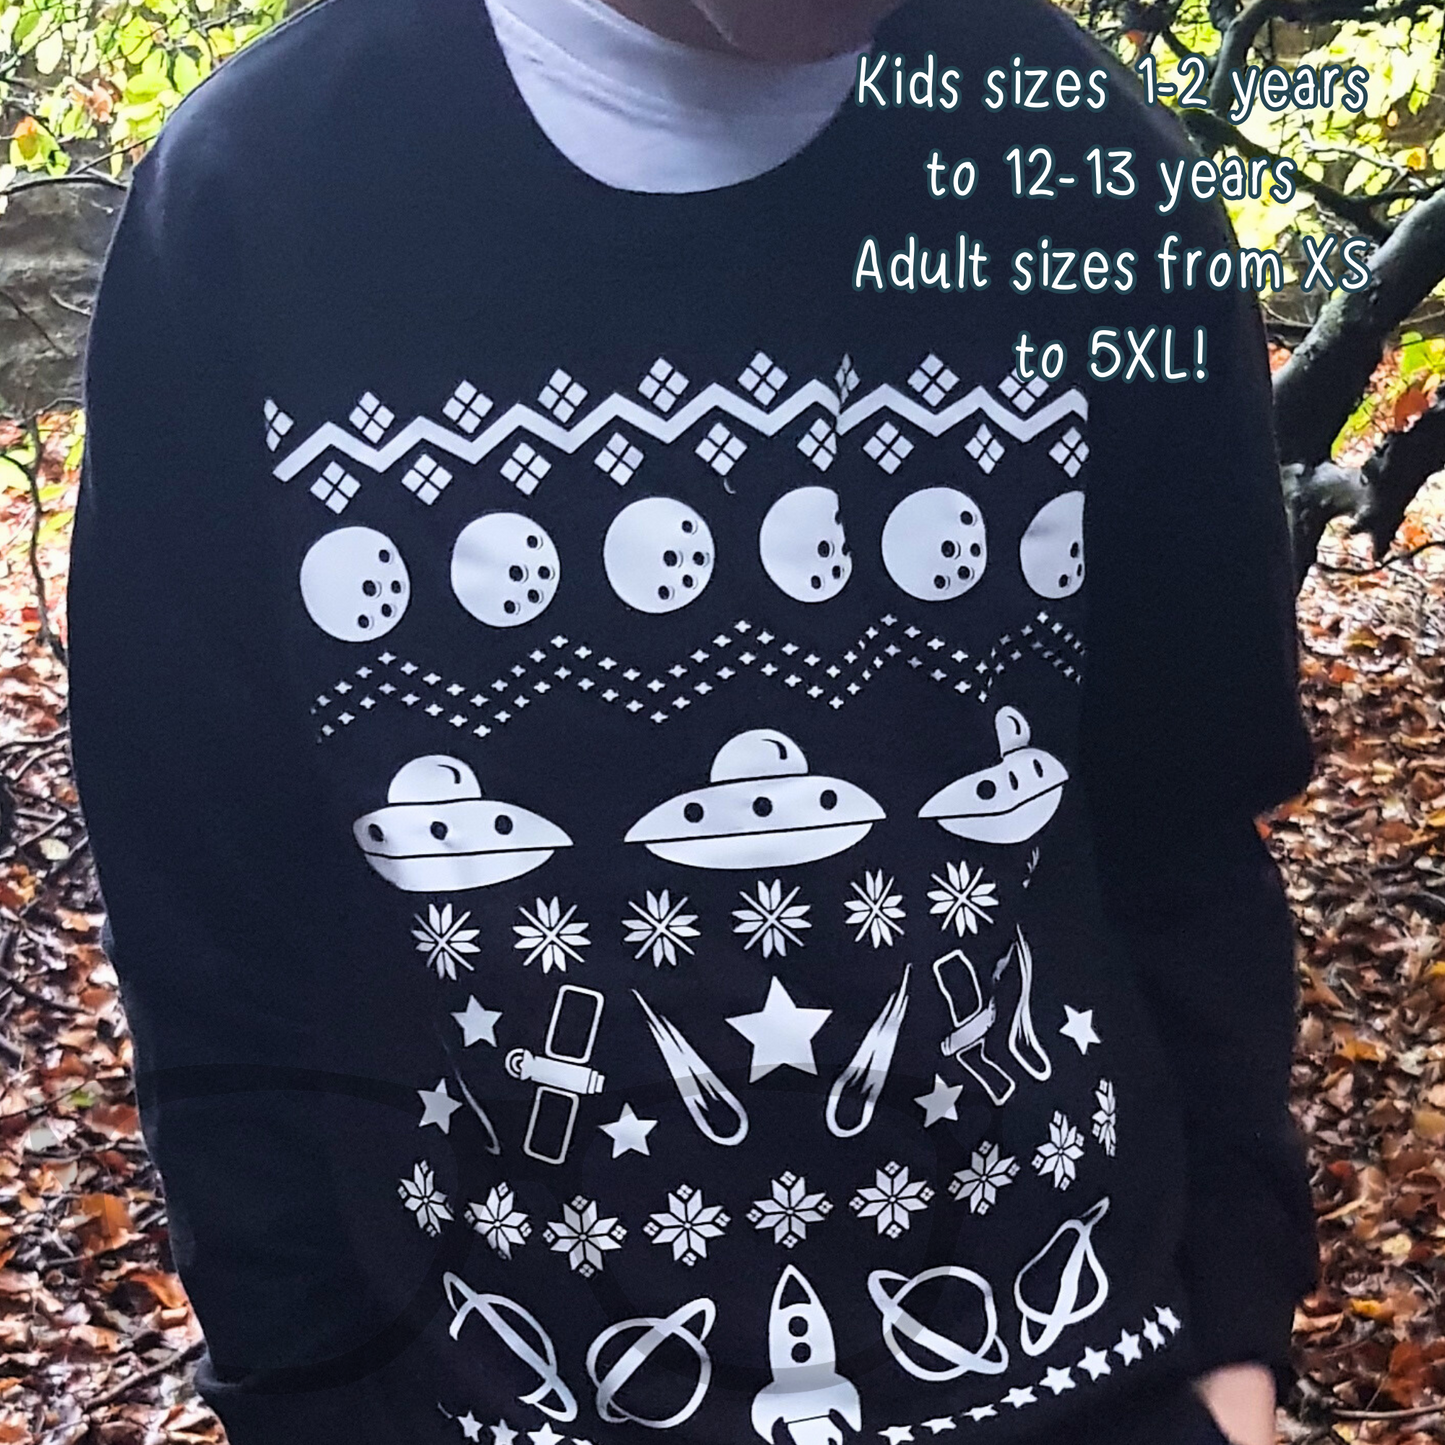 Space themed christmas ugly sweater for kids and adults from 1-2 to 2 years to XS to 5xl! Black jersey sweater with white HTV design